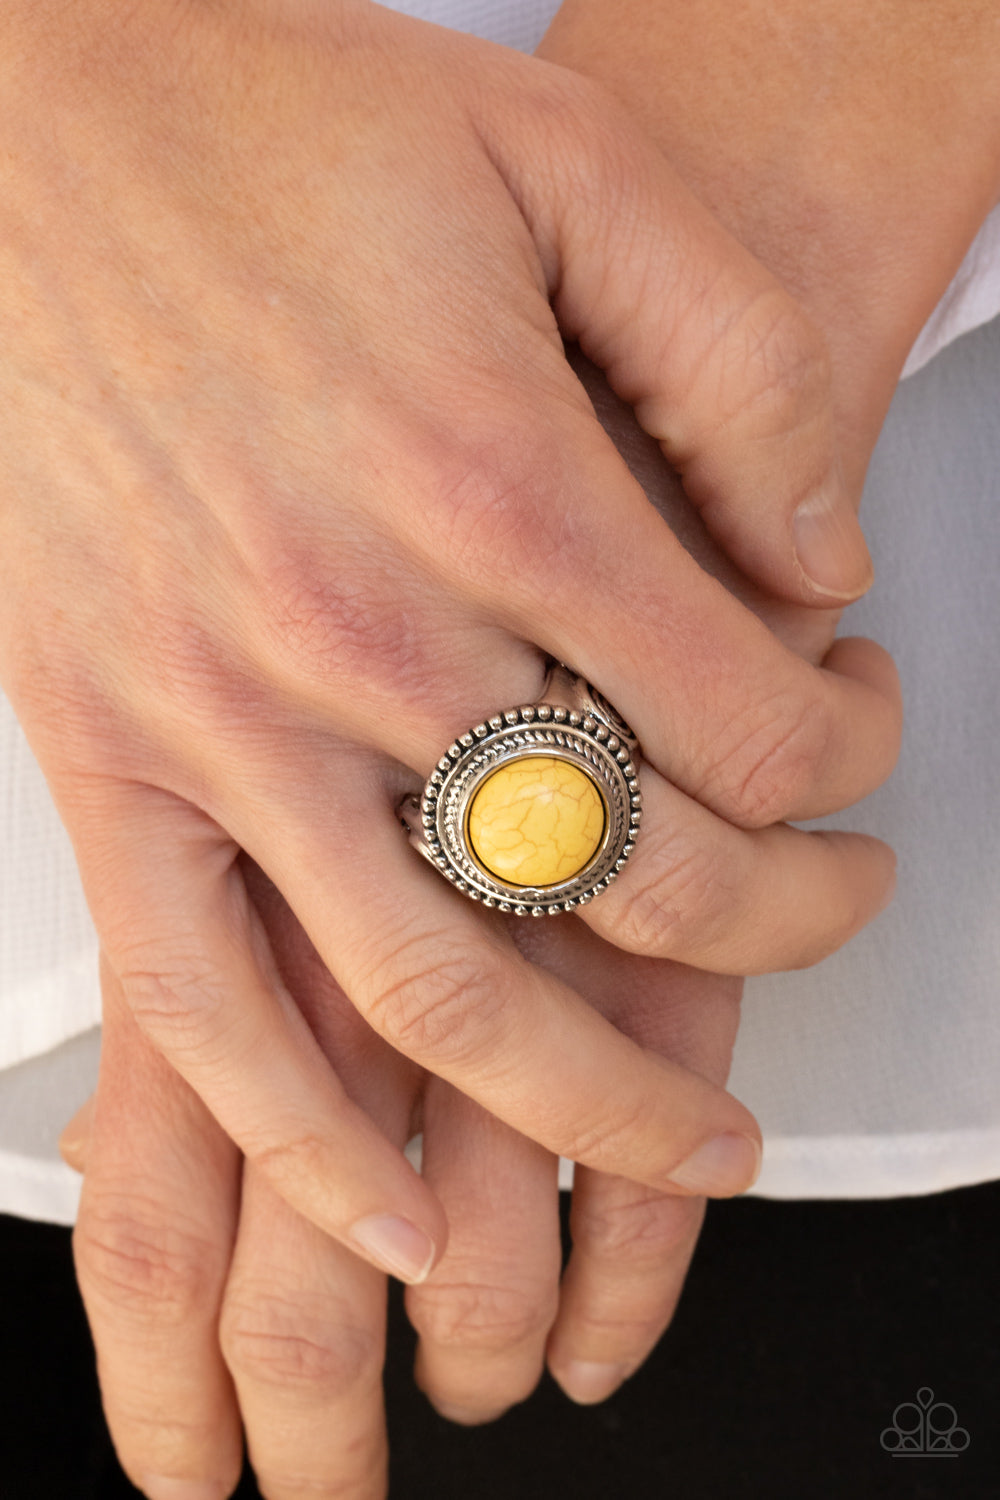 Evolutionary Essence - Yellow and Silver Ring - Paparazzi Accessories -
A round yellow stone is pressed into the center of a studded silver frame embossed with rustic swirls, creating a trendy tribal inspired centerpiece atop the finger. Features a stretchy band for a flexible fit. Sold as one individual ring.
